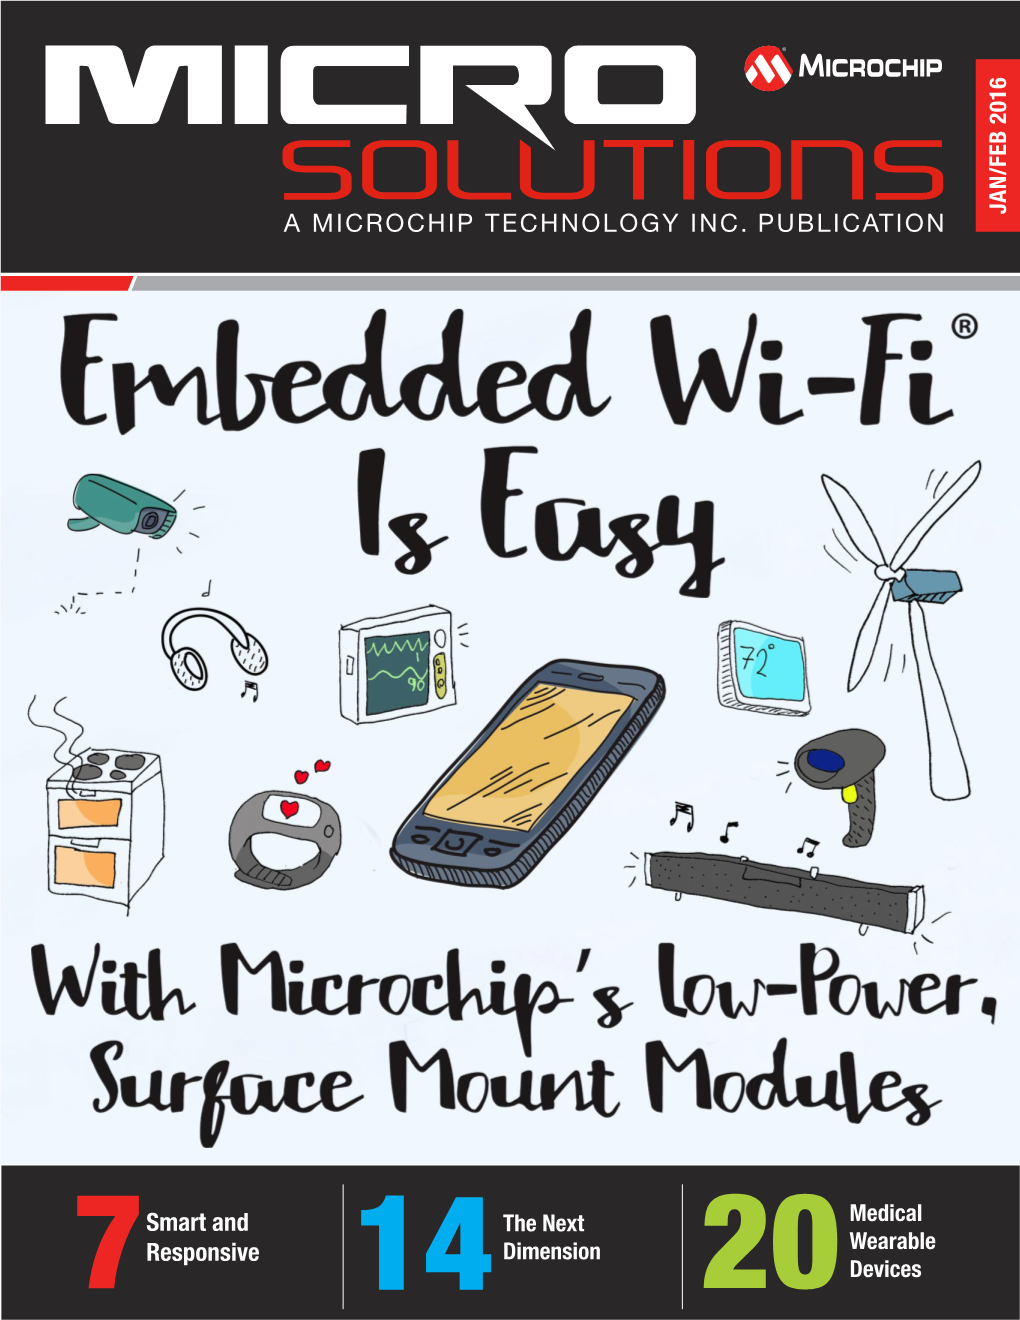 A MICROCHIP TECHNOLOGY INC. PUBLICATION Smart and Responsive